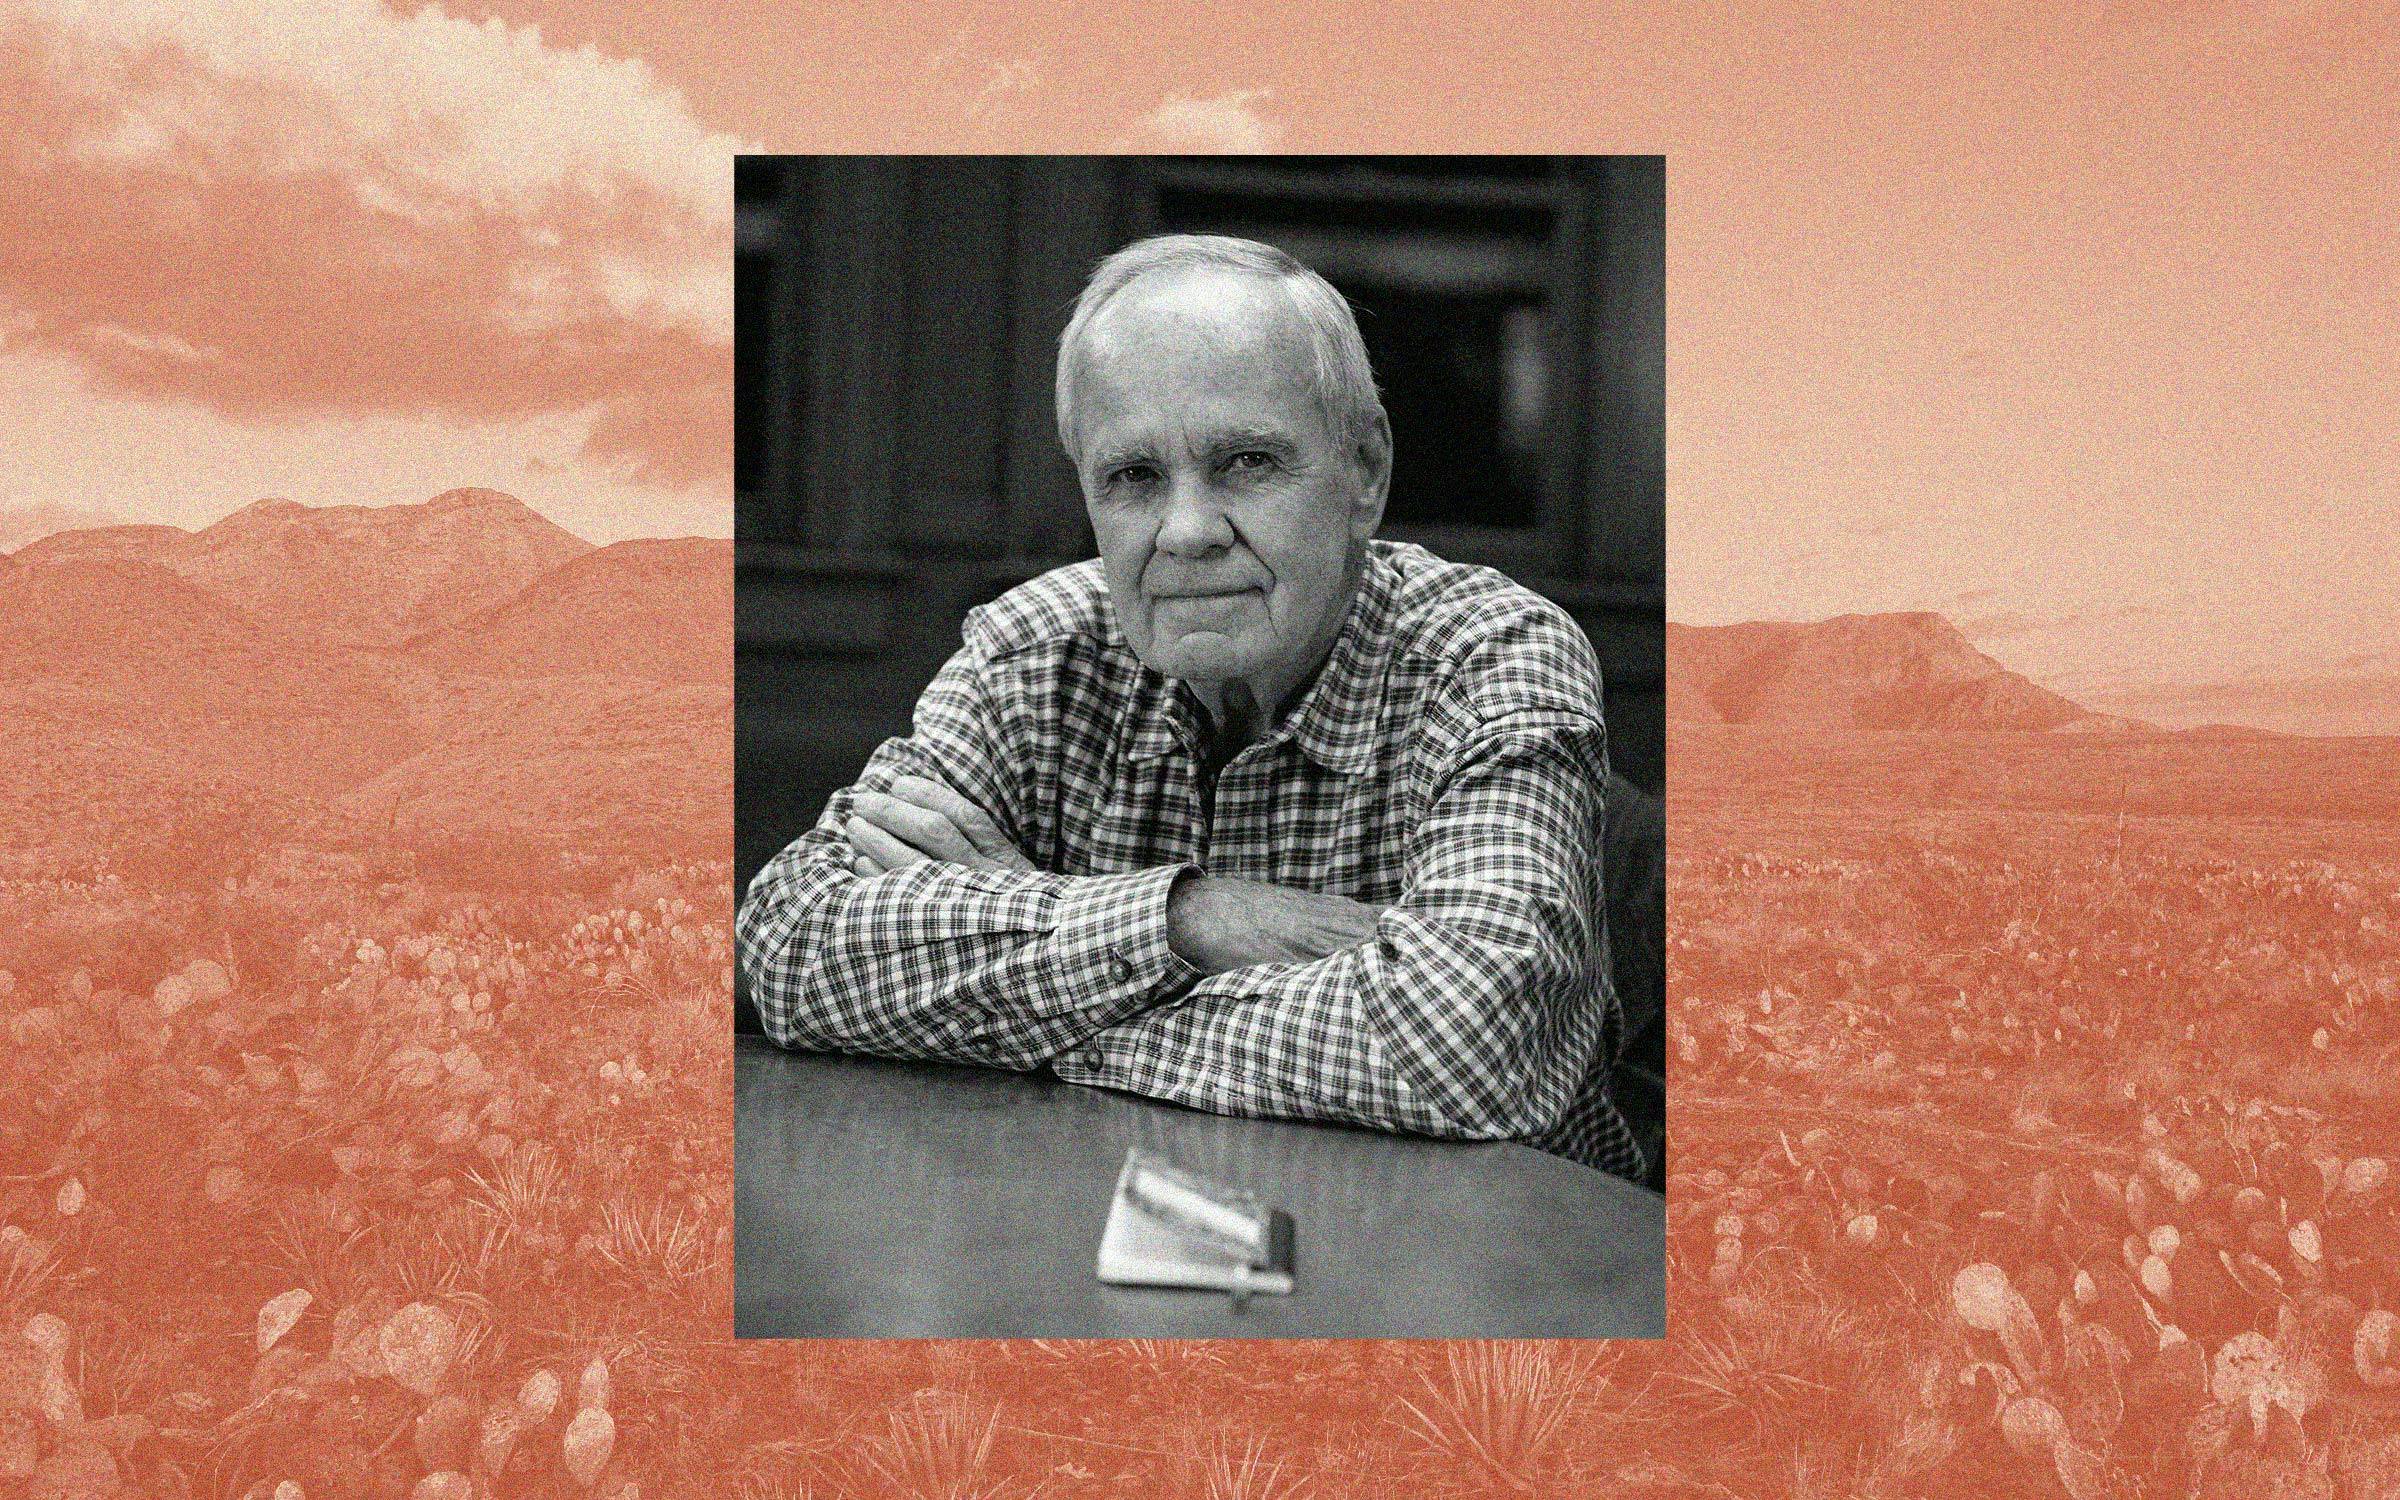 https://img.texasmonthly.com/2023/06/cormac-mccarthy.jpg?auto=compress&crop=faces&fit=fit&fm=pjpg&ixlib=php-3.3.1&q=45